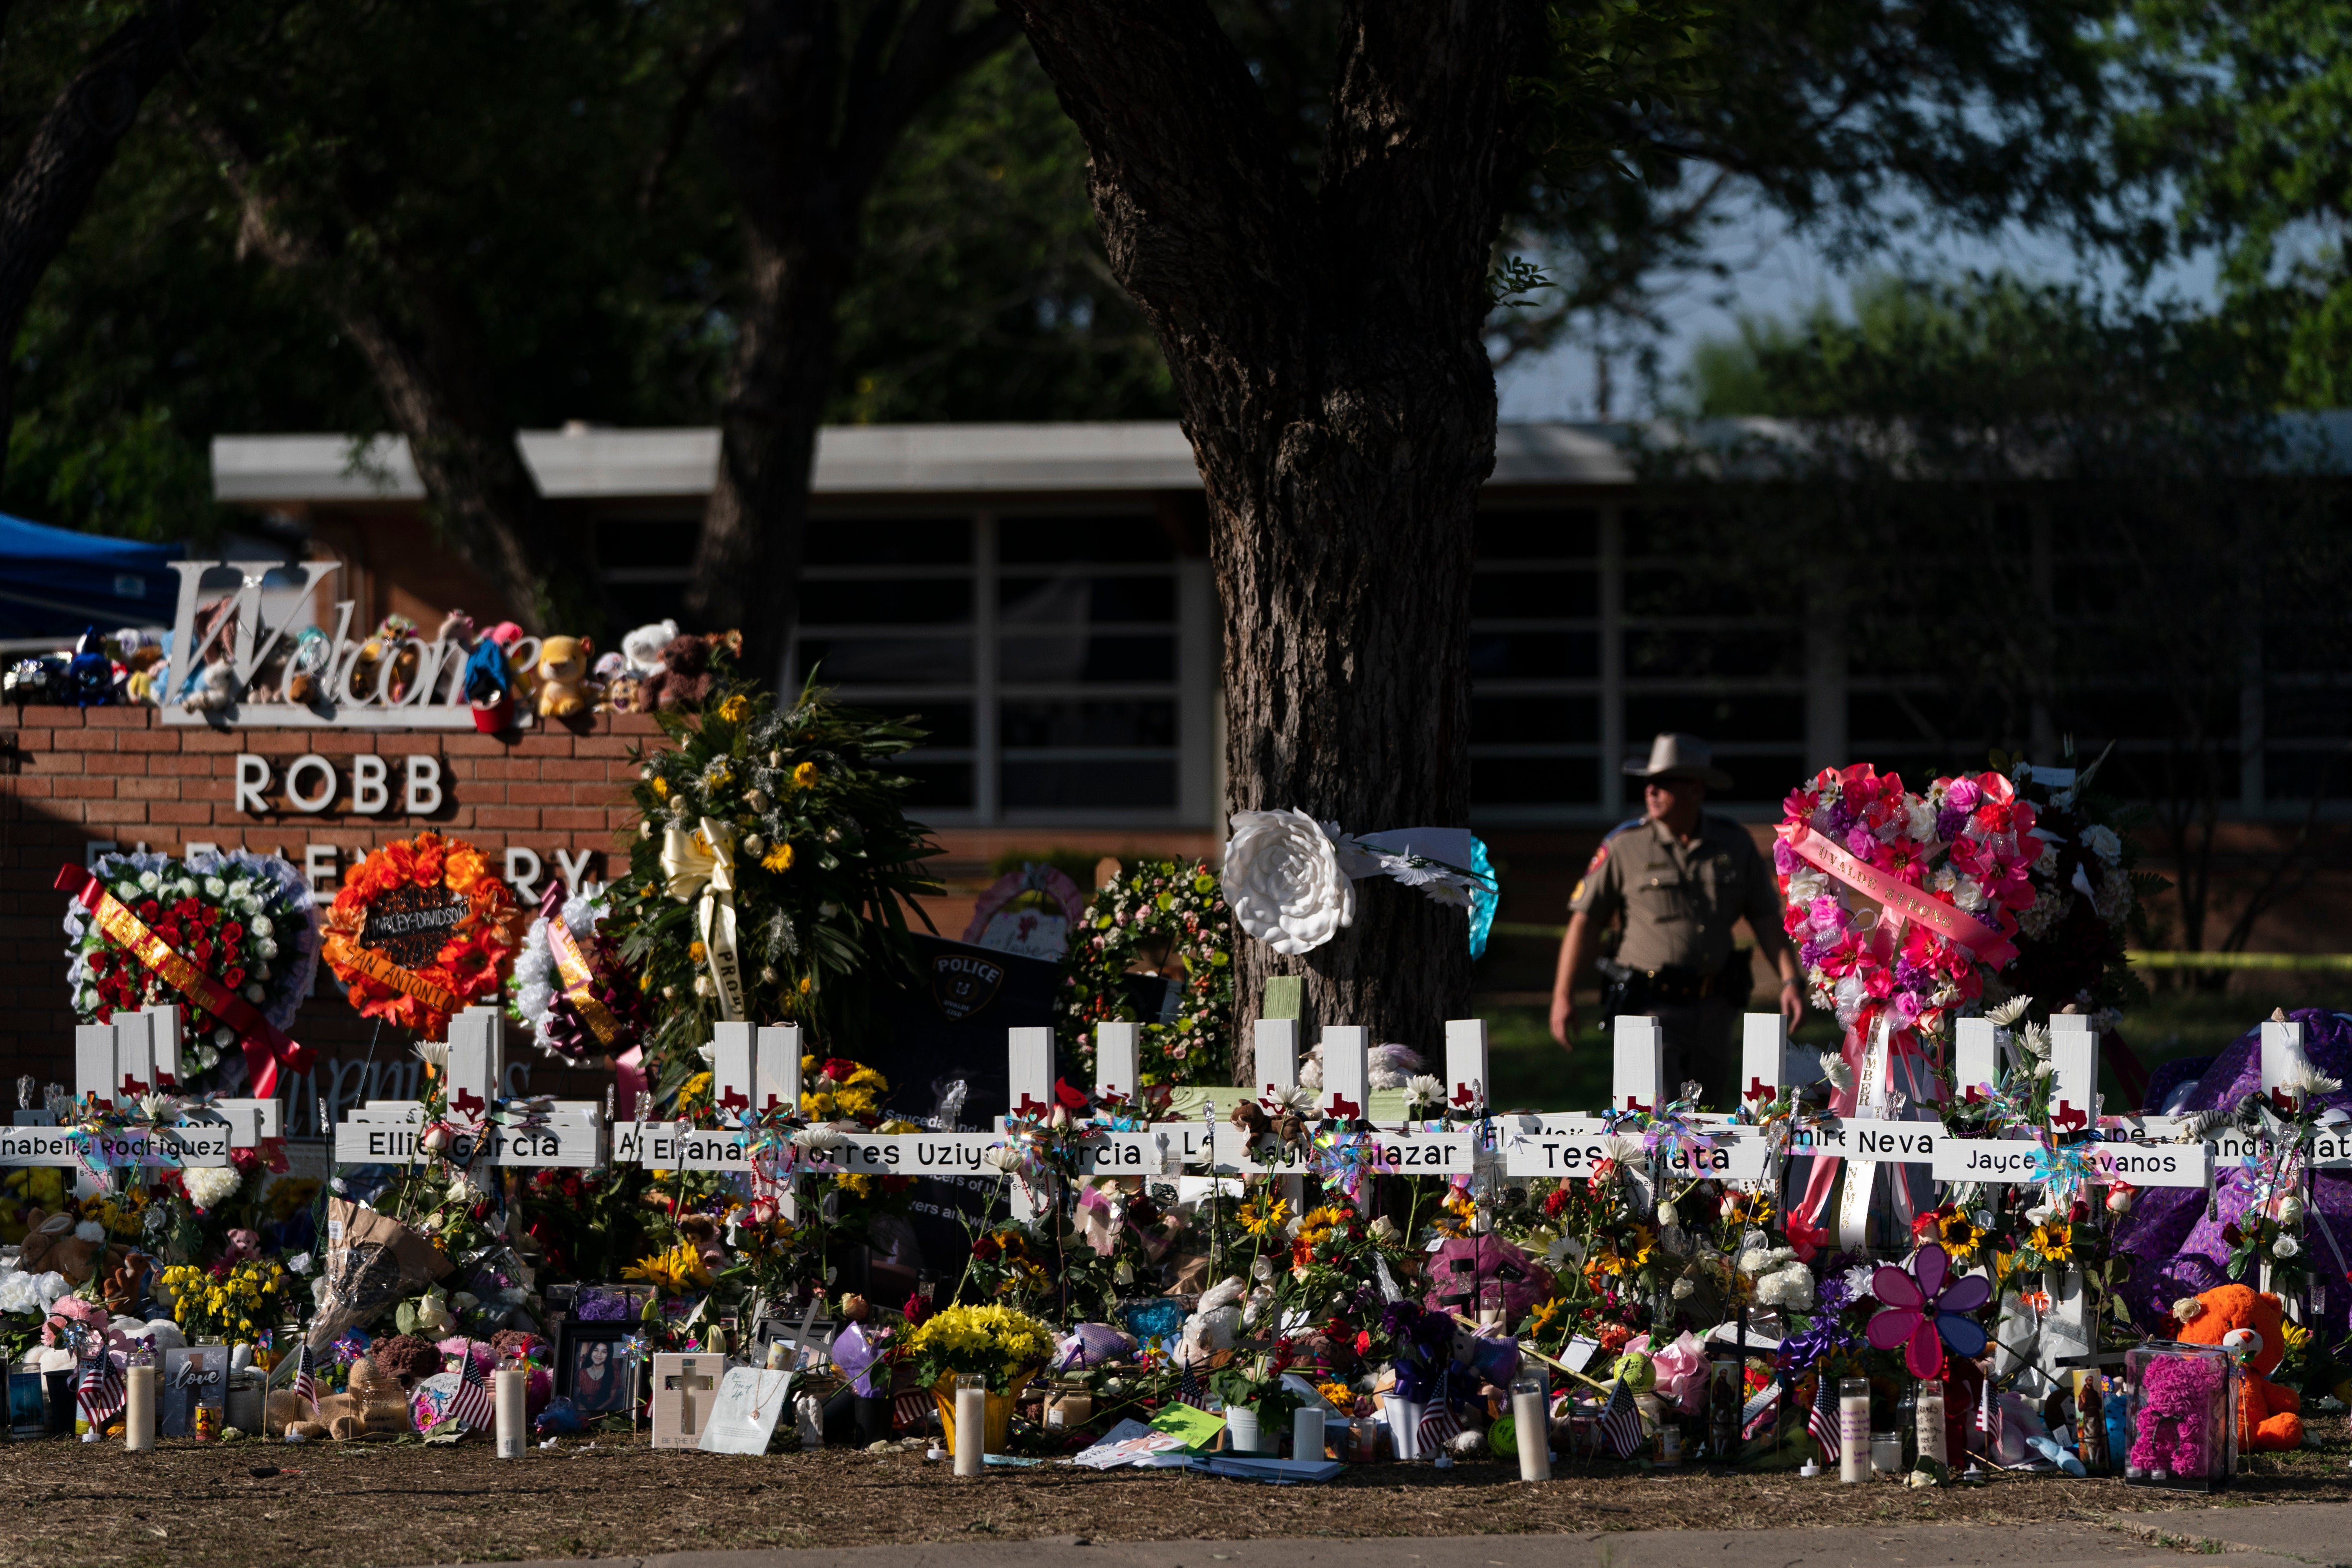 Flowers and candles are placed around crosses at a memorial outside Robb Elementary School in Uvalde, Texas, to honor the victims killed in the shooting